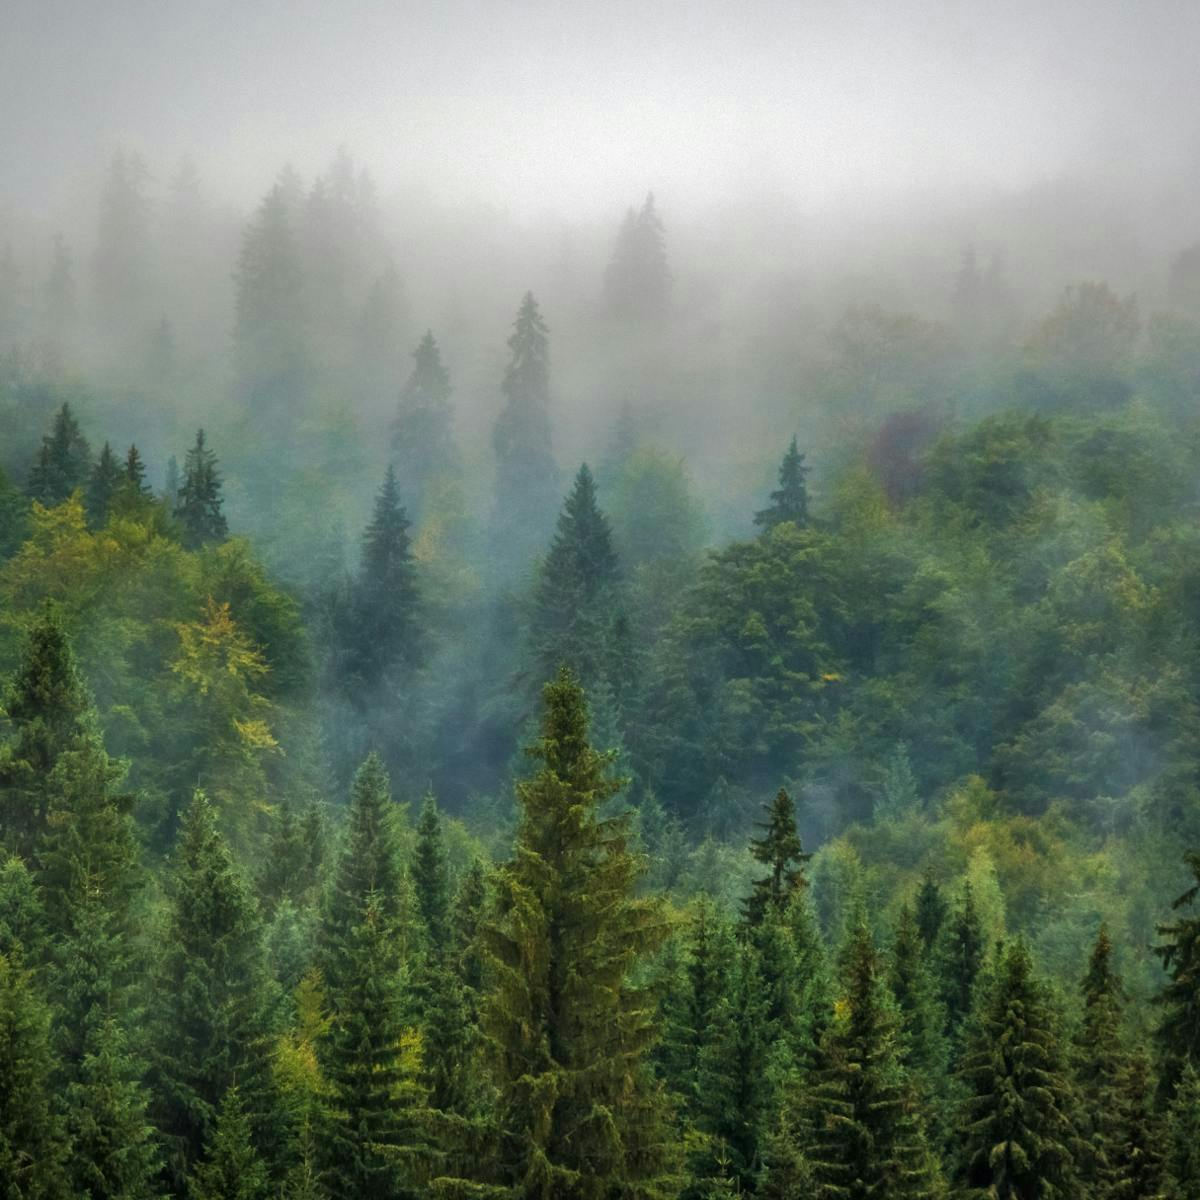 A forest full of trees covered in mist.